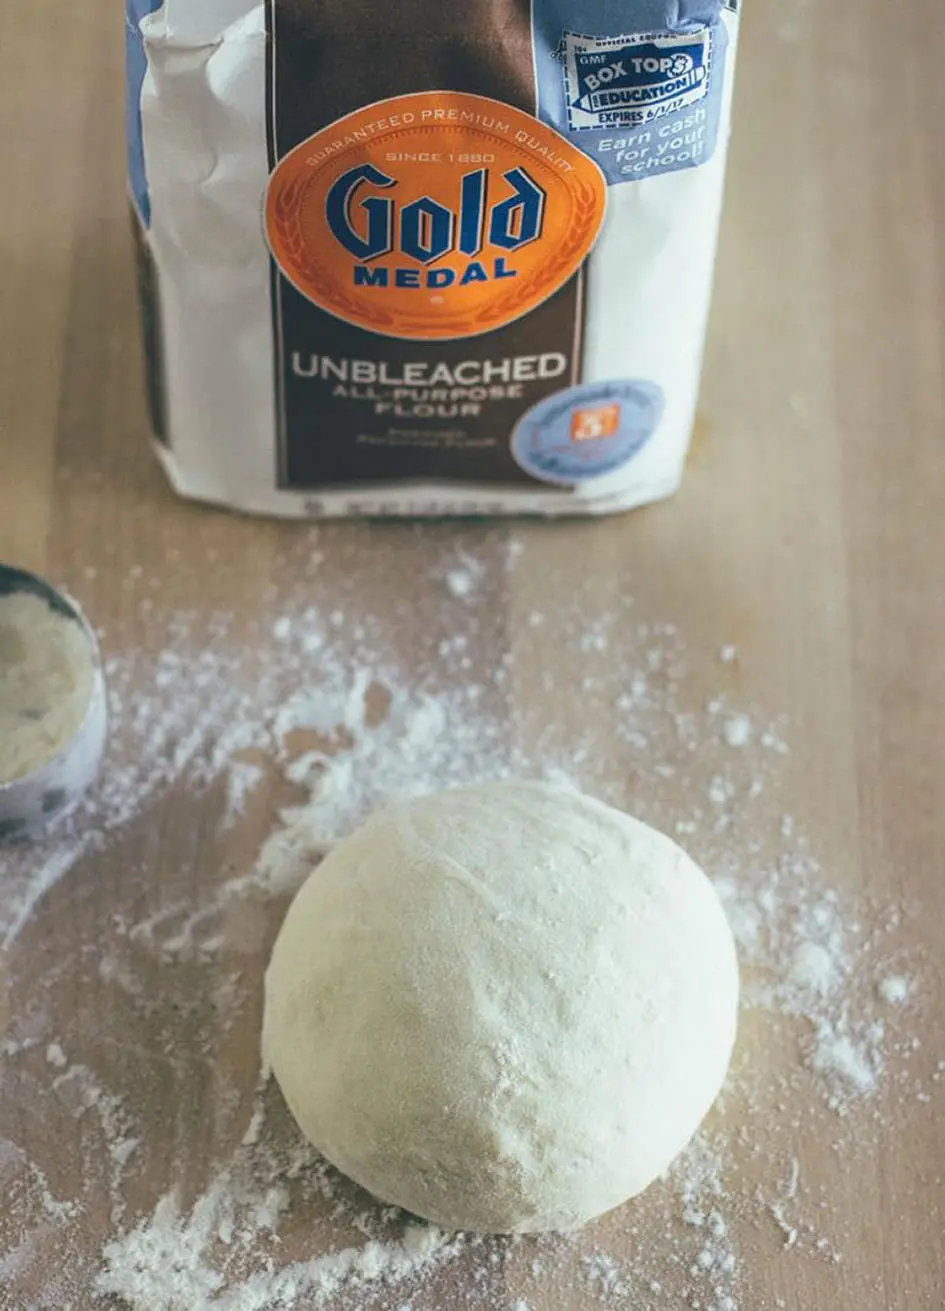 Unleash your baking skills with this incredible Gold medal unbleached all purpose Flour dough recipe